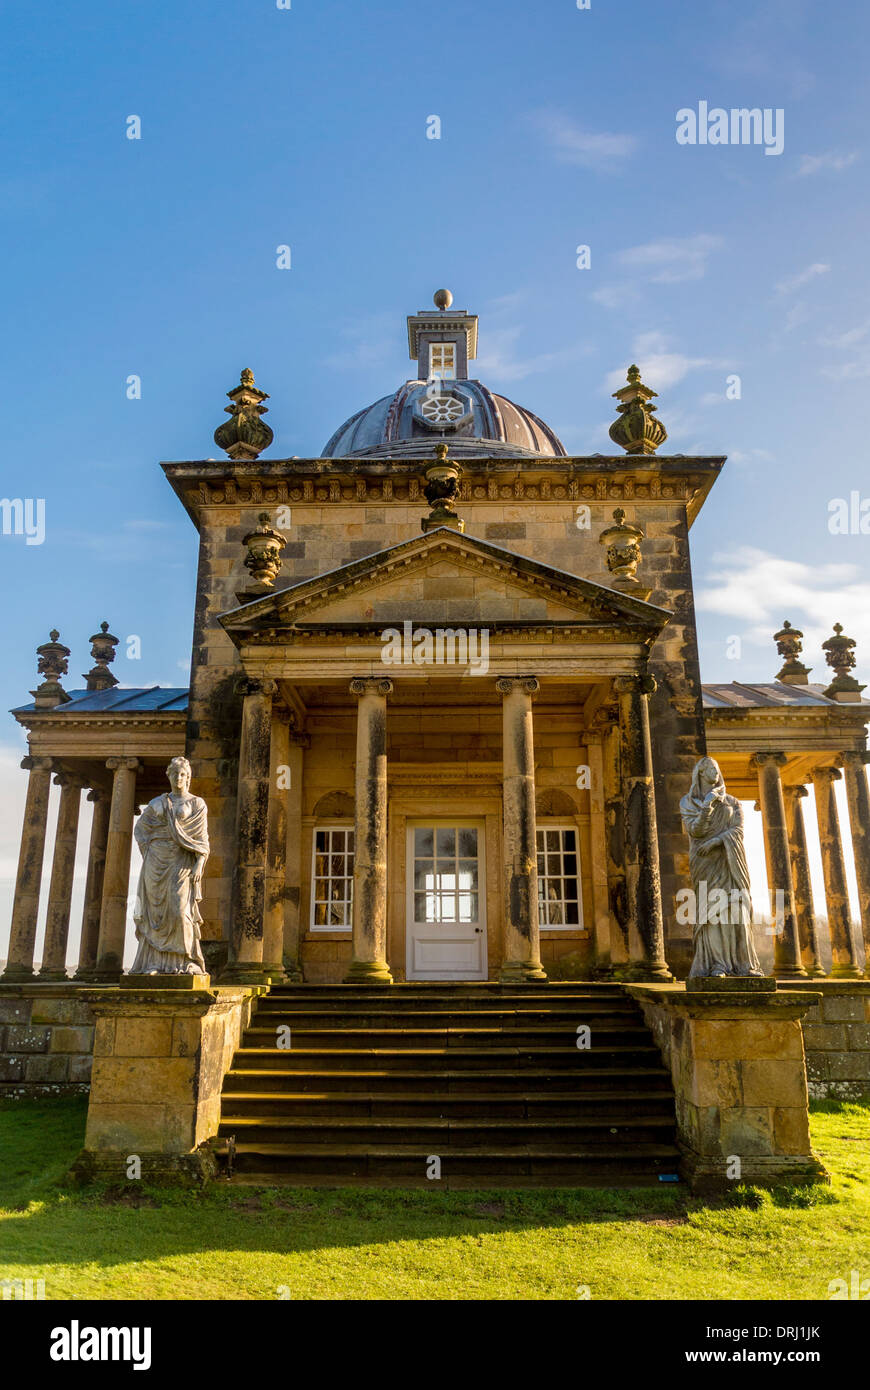 Exterior steps and facade of the Temple of the Four Winds. Castle Howard, North Yorkshire. Stock Photo